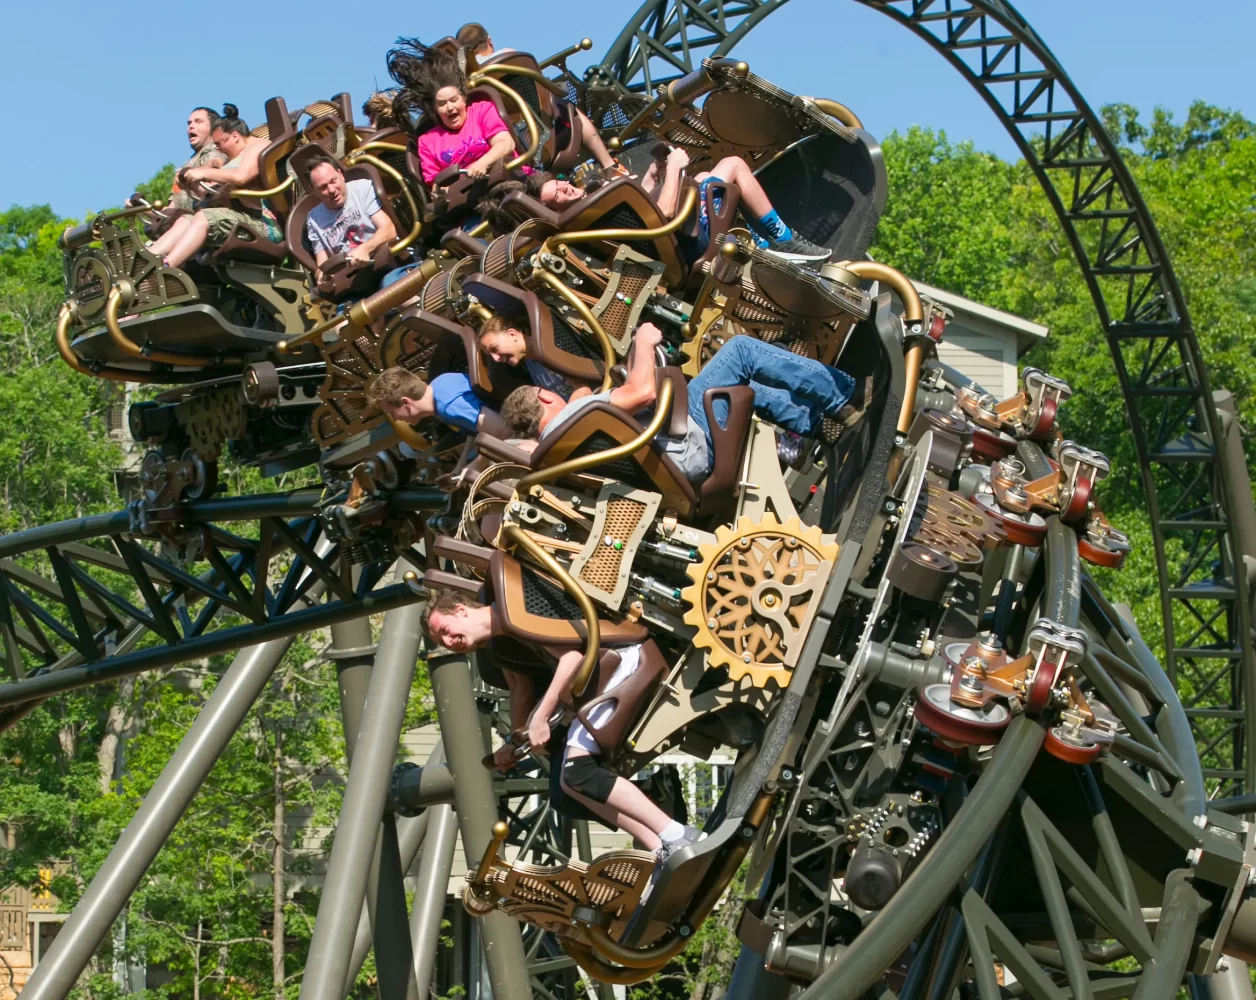 a roller coaster with several people riding it